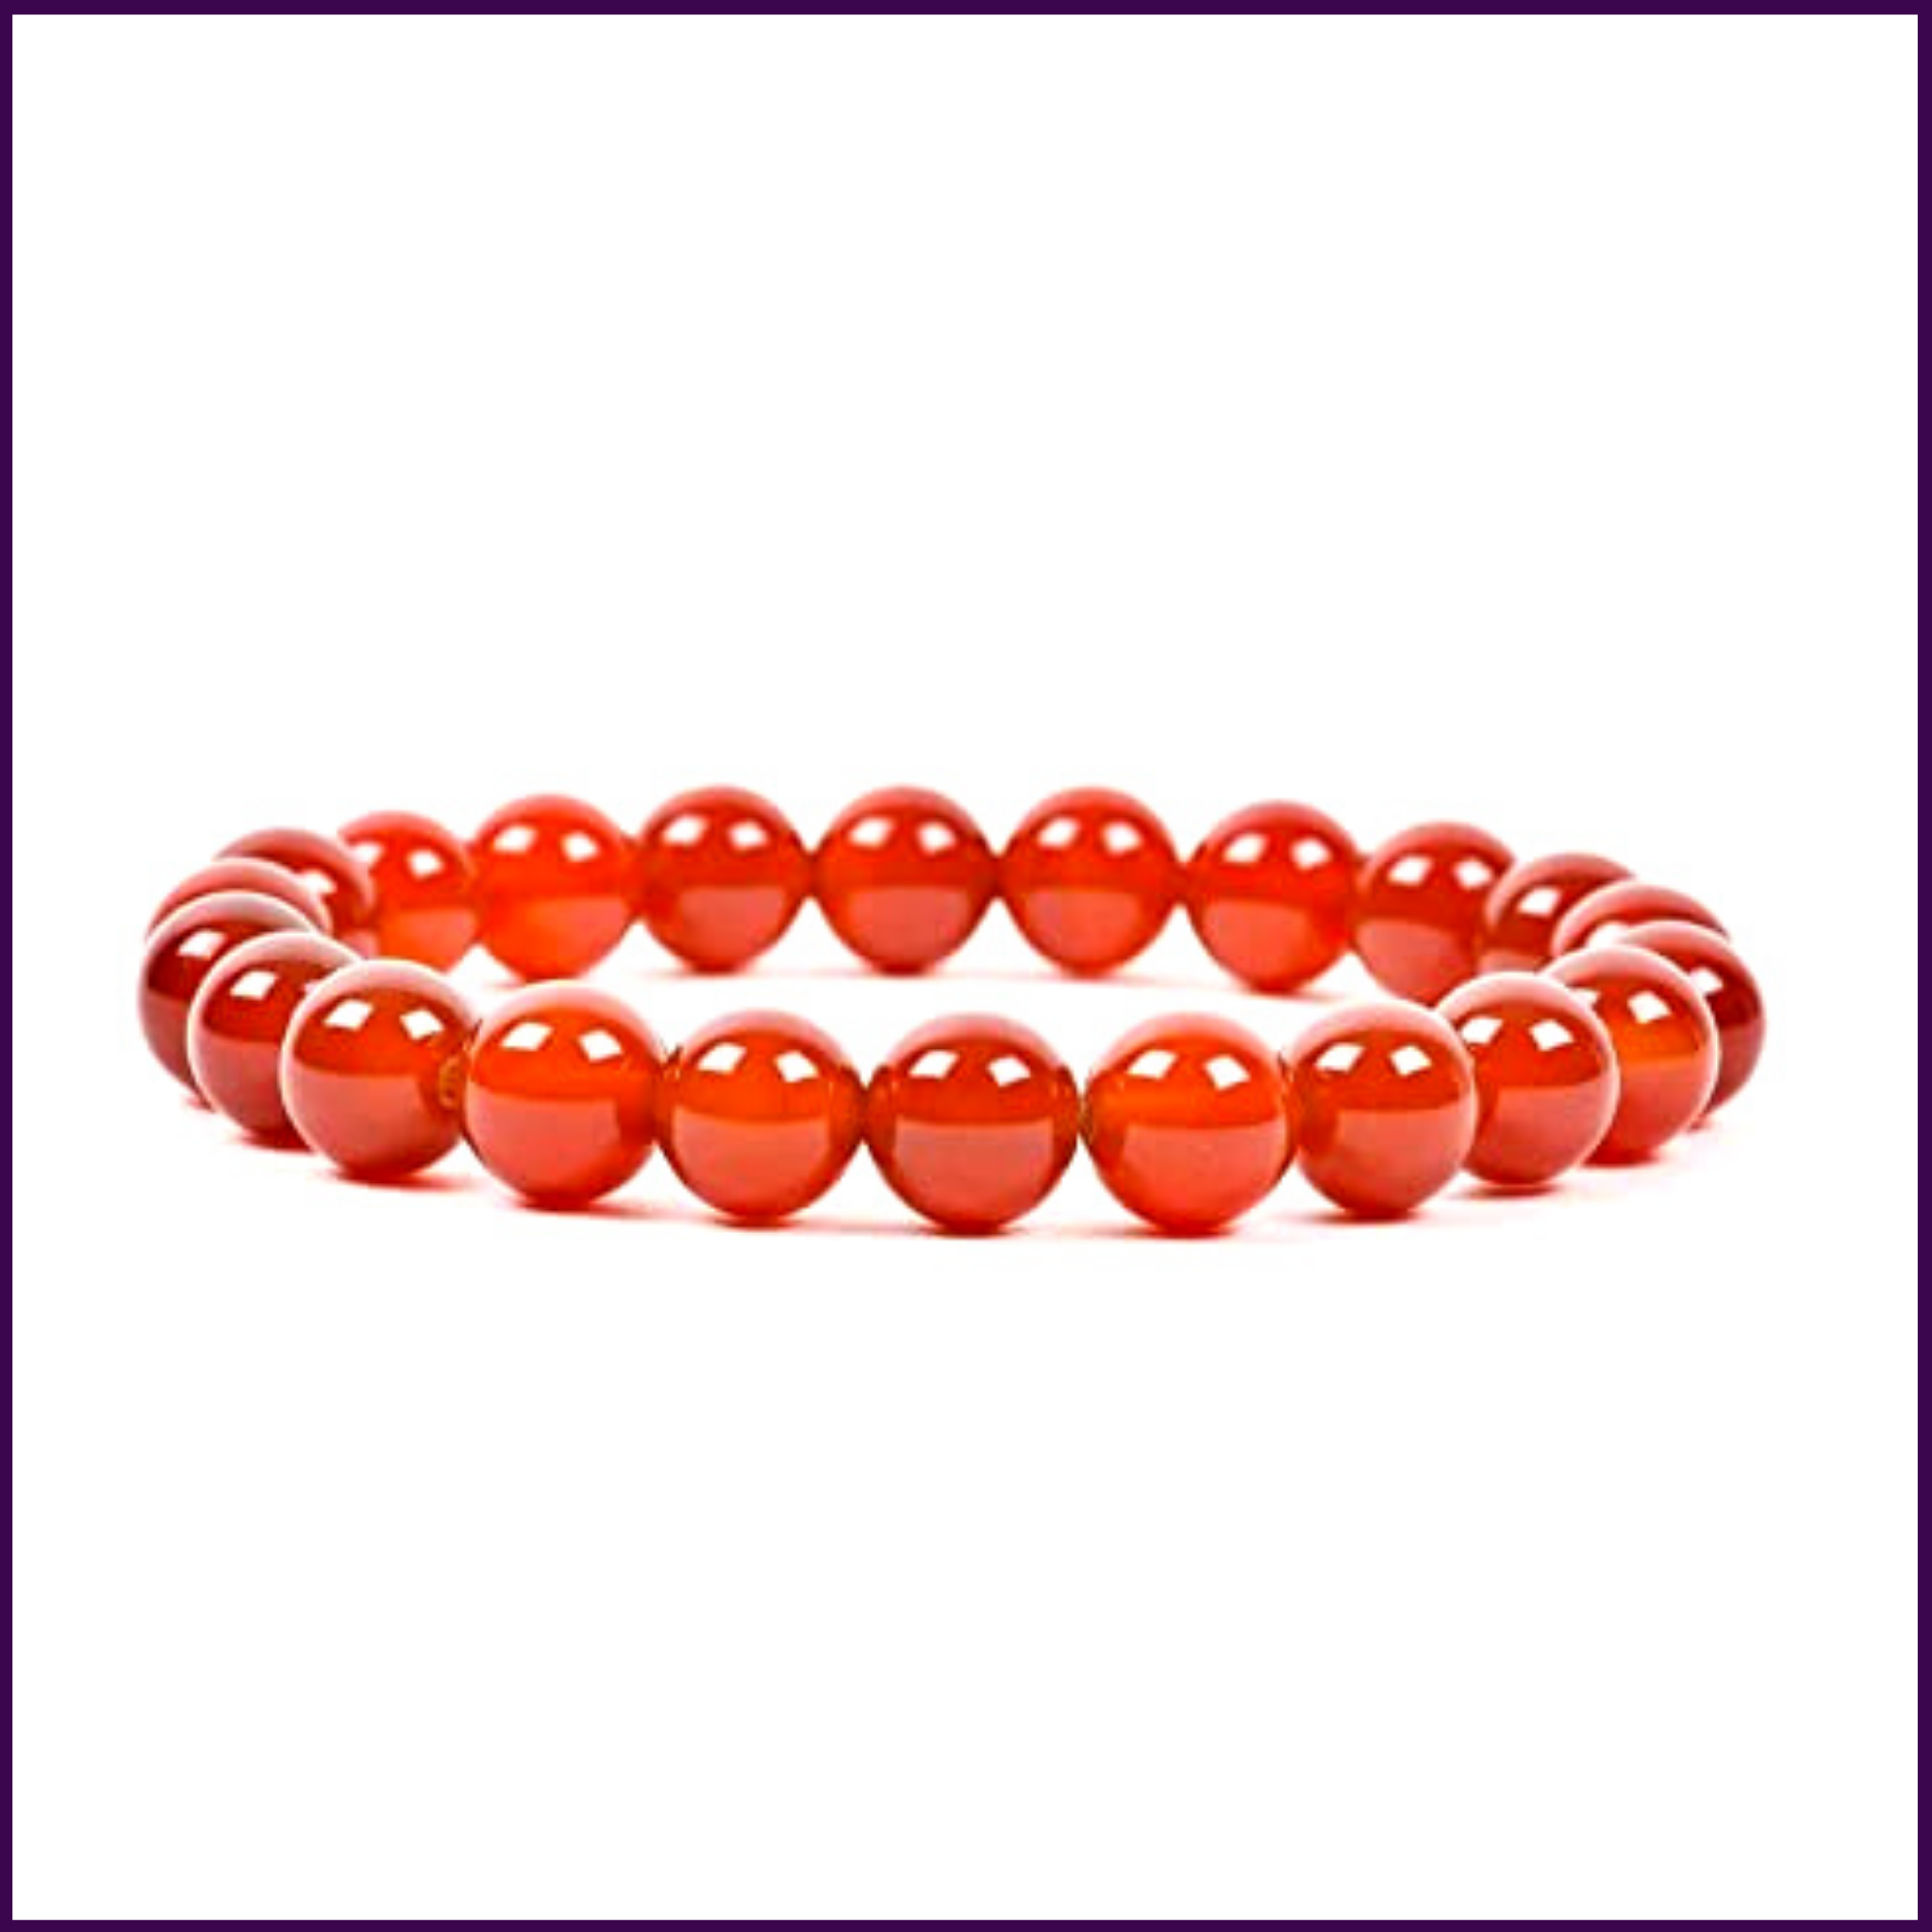 Red Carnelian Bracelet Crystal For Facing Difficult Situations in Life - 51pyramids